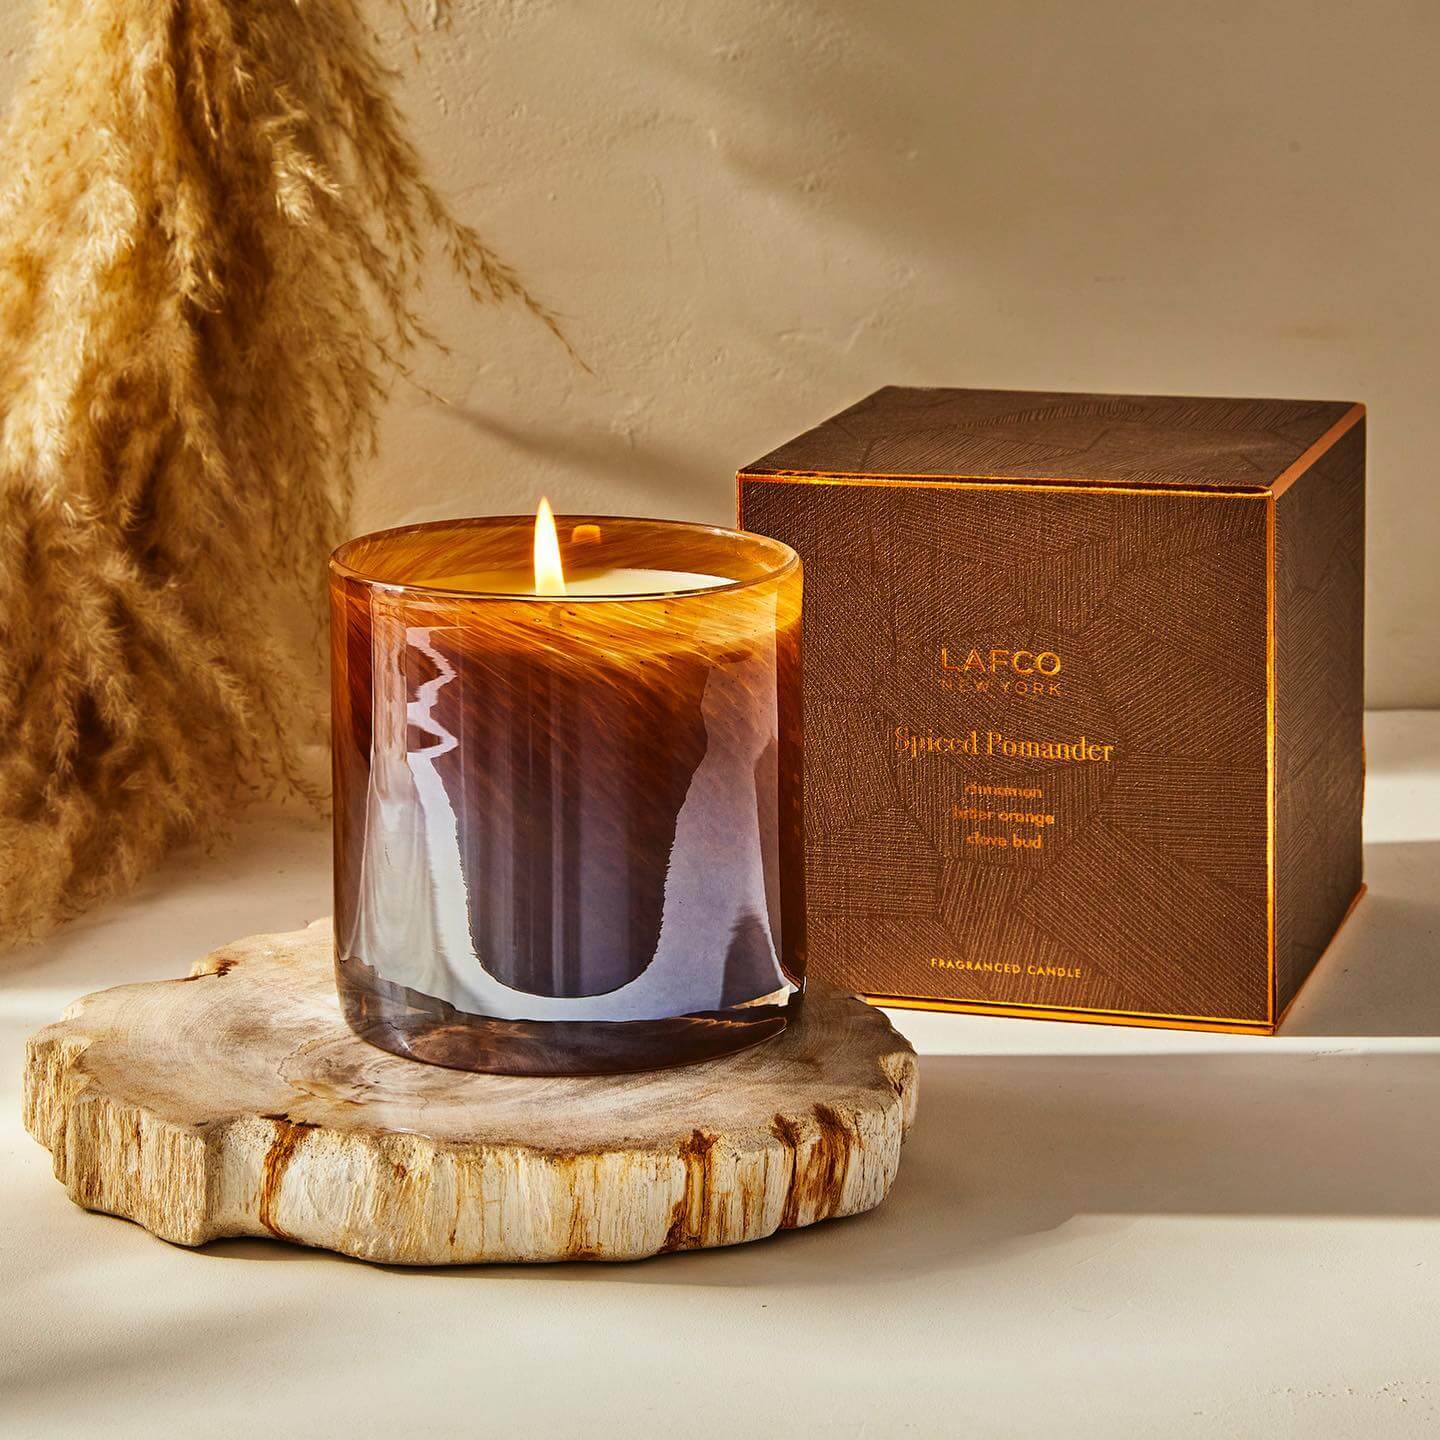 Spiced Pomander Candle by LAFCO